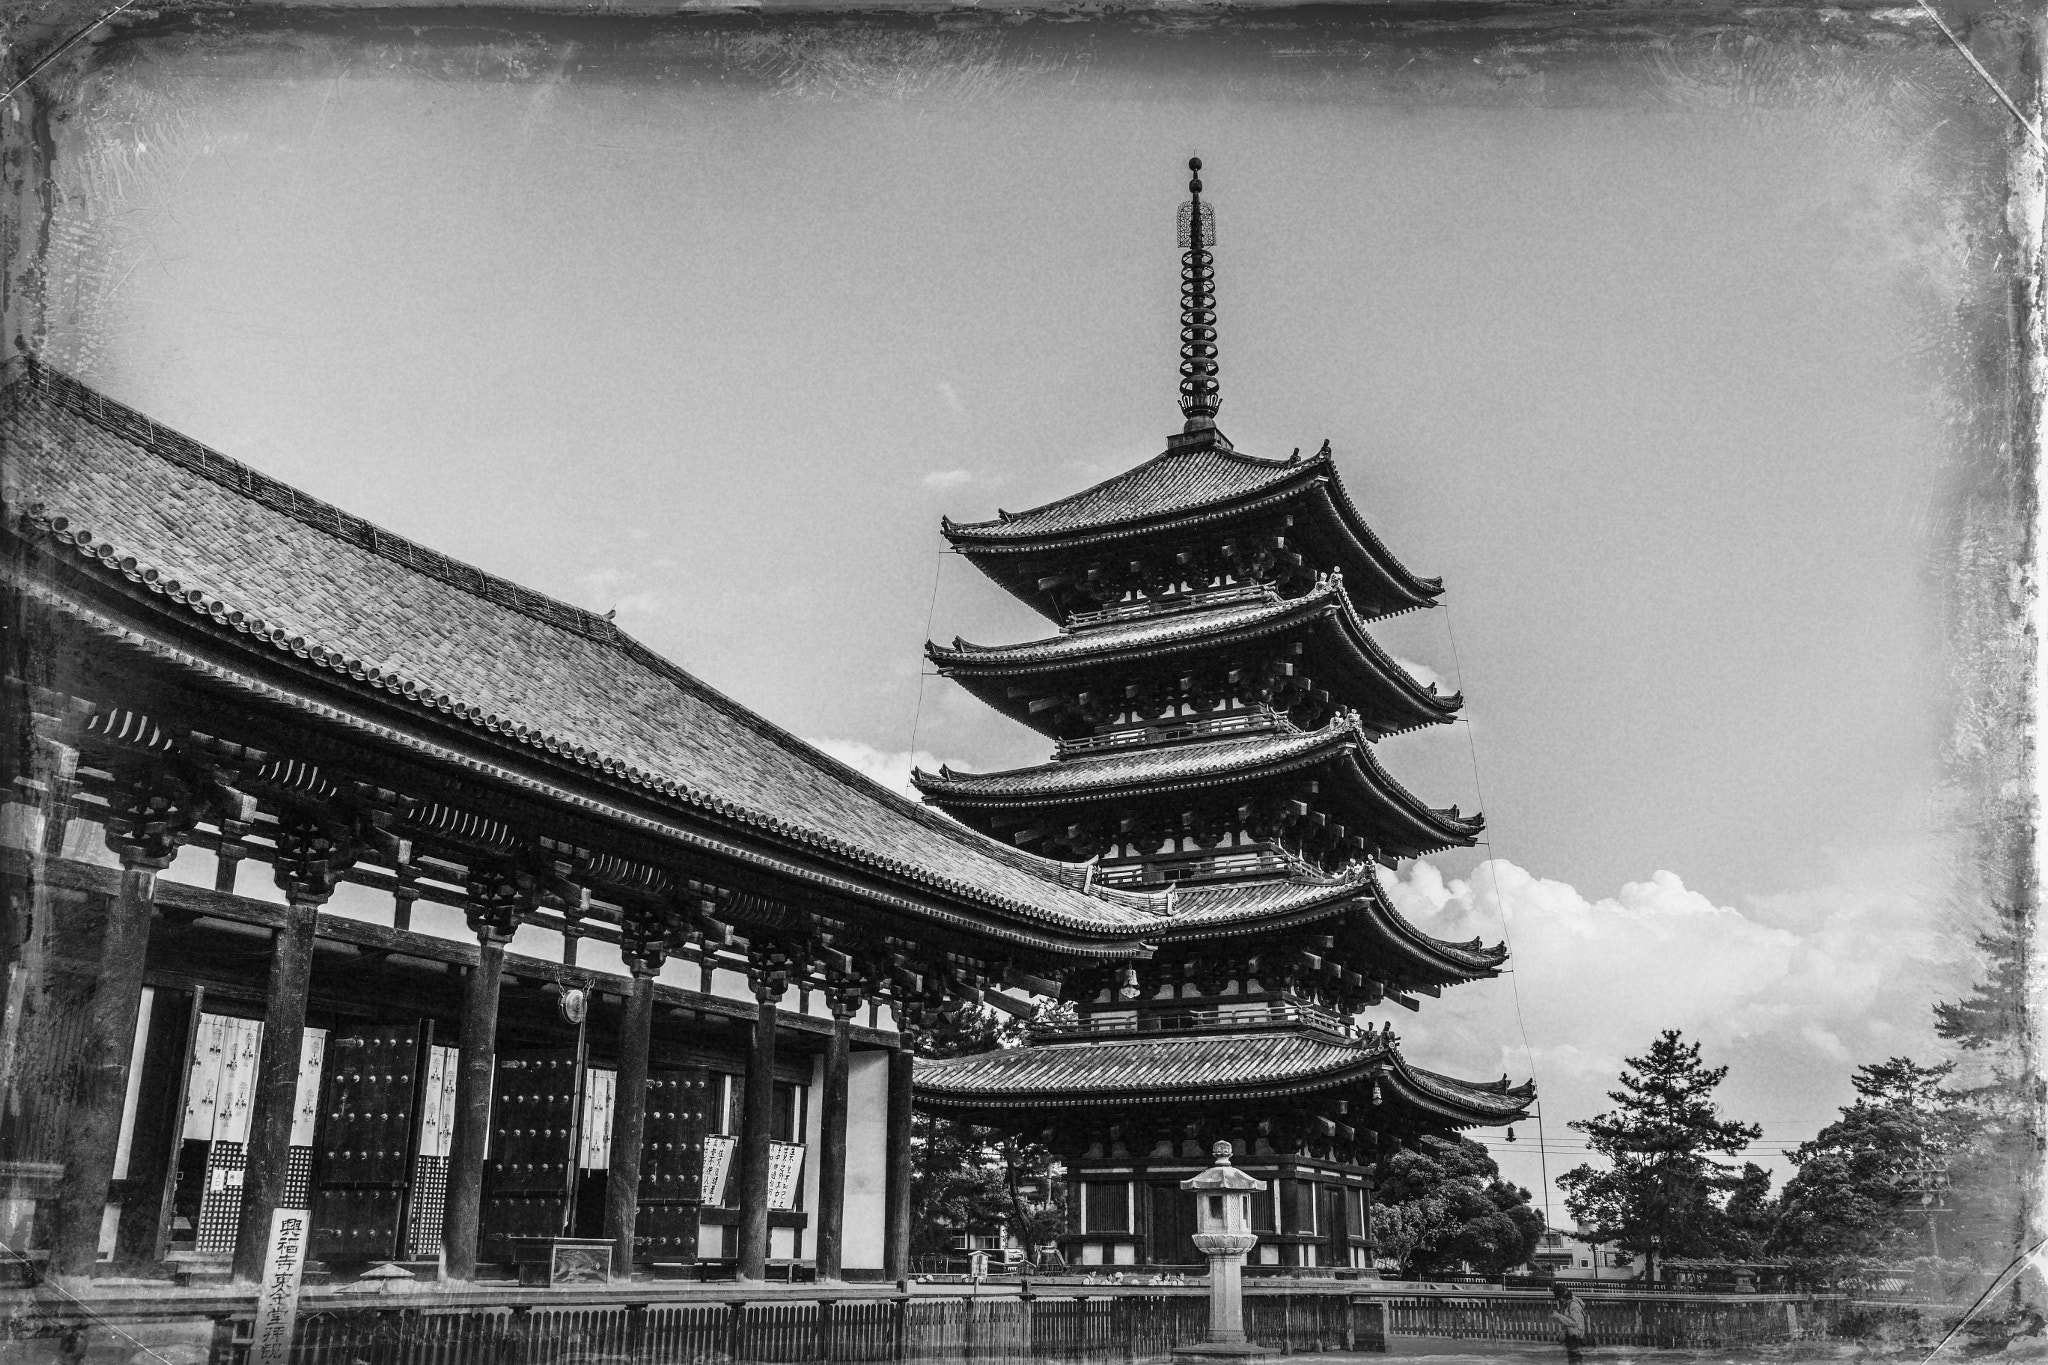 Canon EOS 6D + Sigma 24-105mm f/4 DG OS HSM | A sample photo. Quintuple tower in nara photography